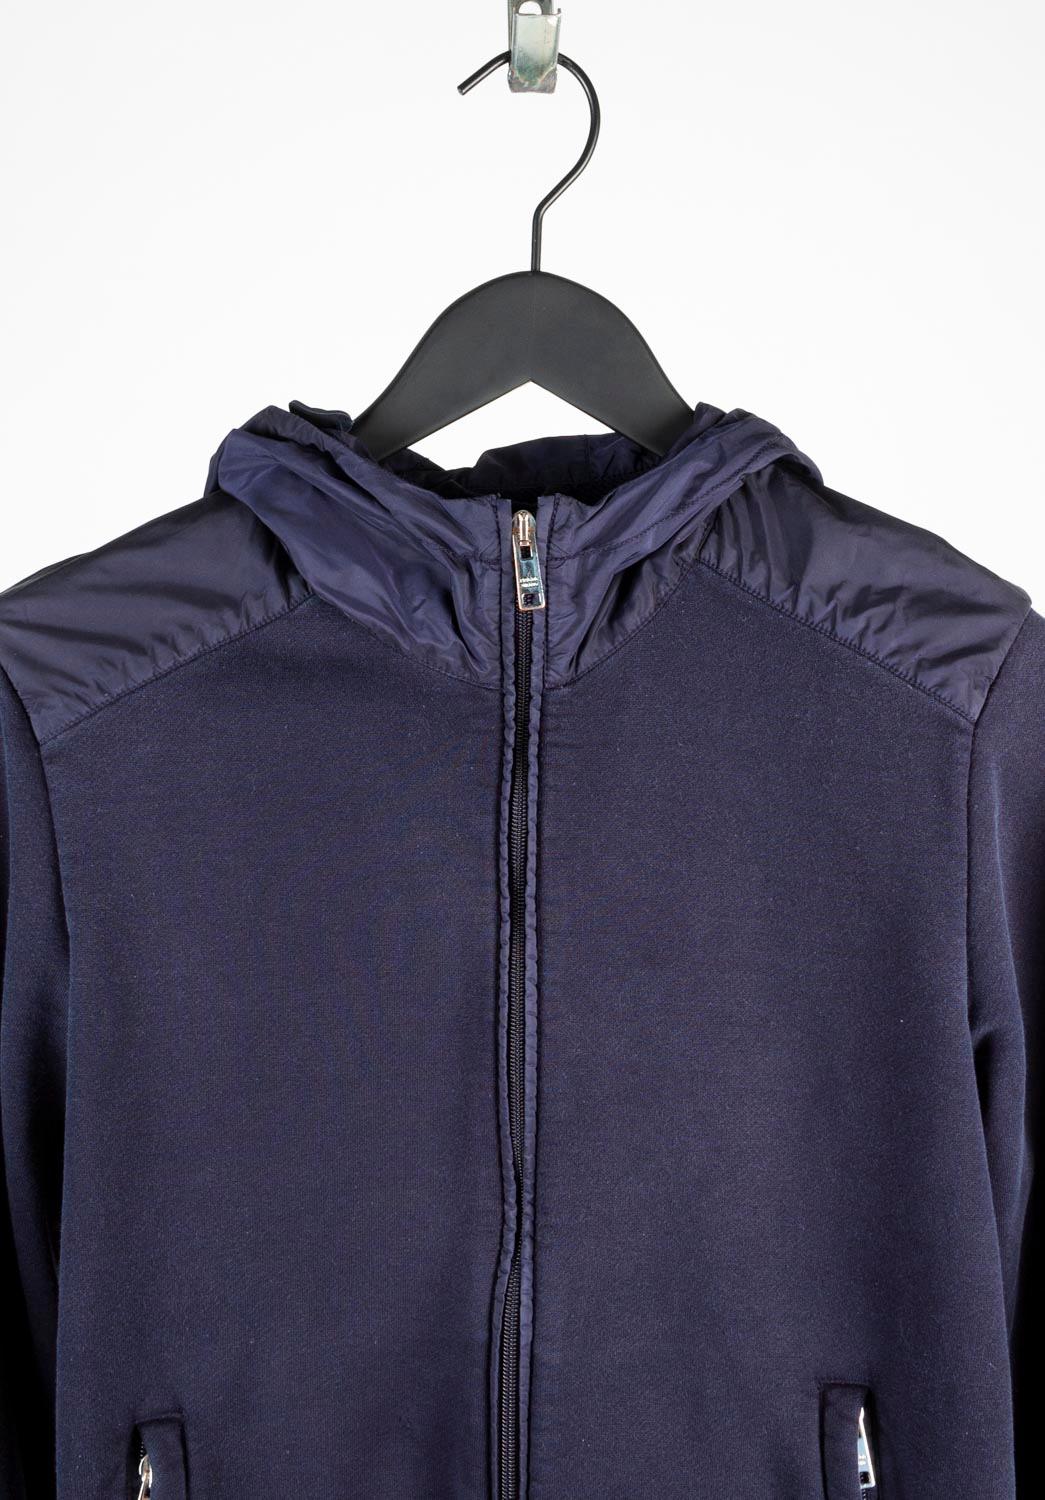 100% genuine Prada Hooded Jacket Jumper, S662
Color: blue
(An actual color may a bit vary due to individual computer screen interpretation)
Material: 100% cotton
Tag size: M
This jacket is great quality item. Rate 8 of 10, very good used